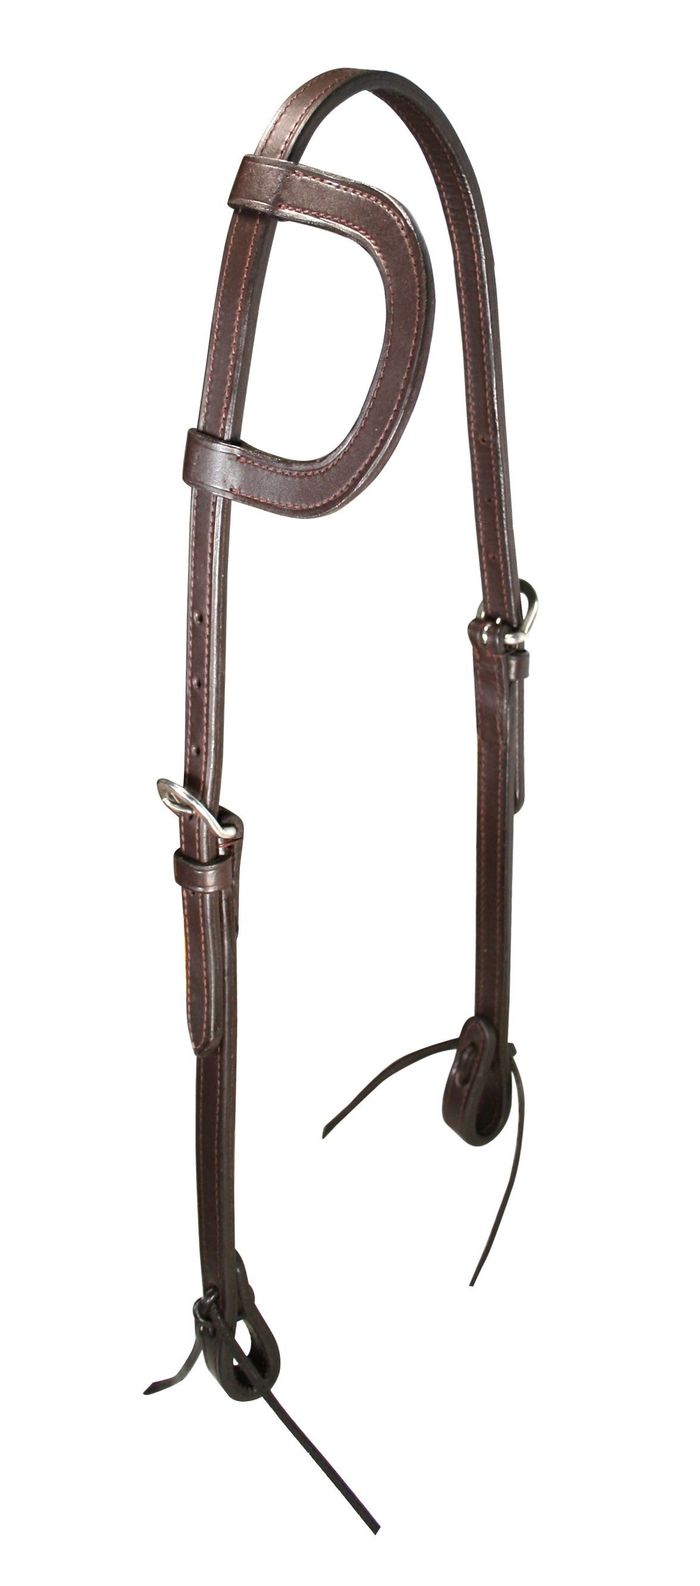 Premium double layer leather headstalls / headstall